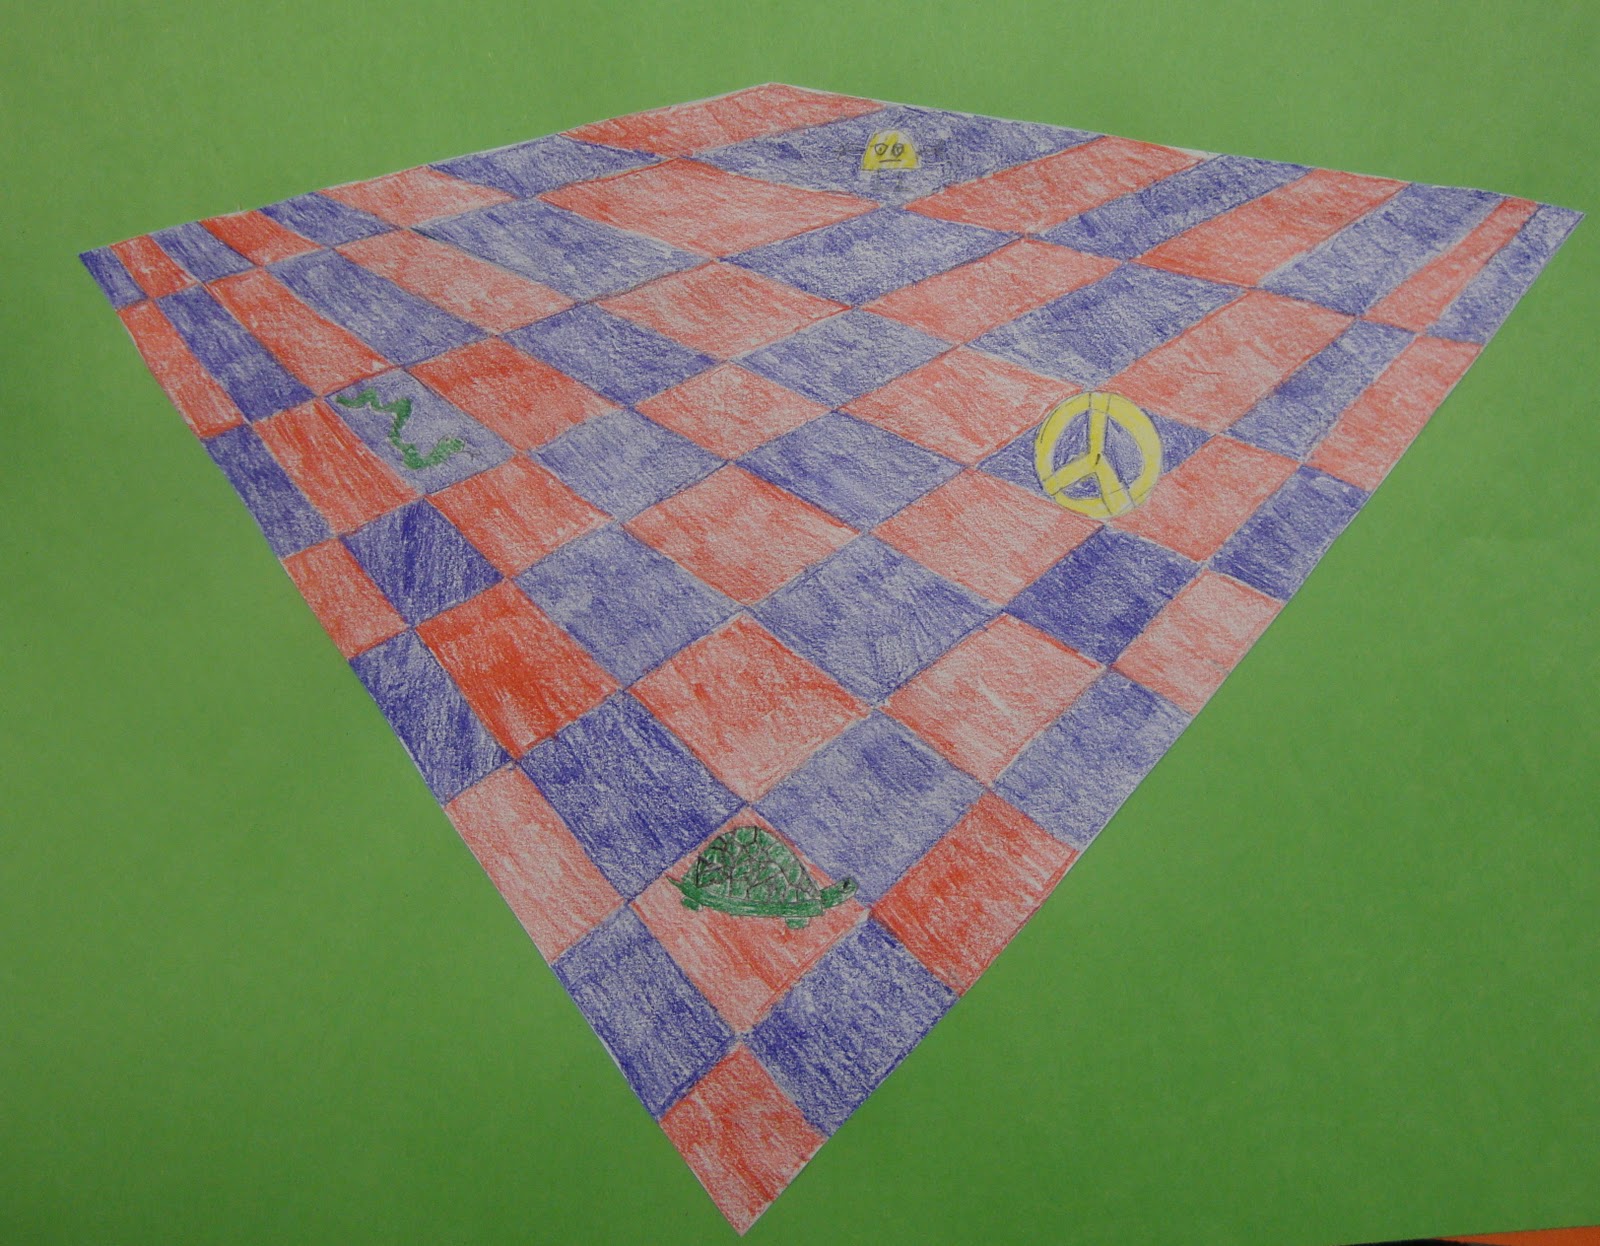 Art. Paper. Scissors. Glue!: 2 Point Perspective Chess Boards